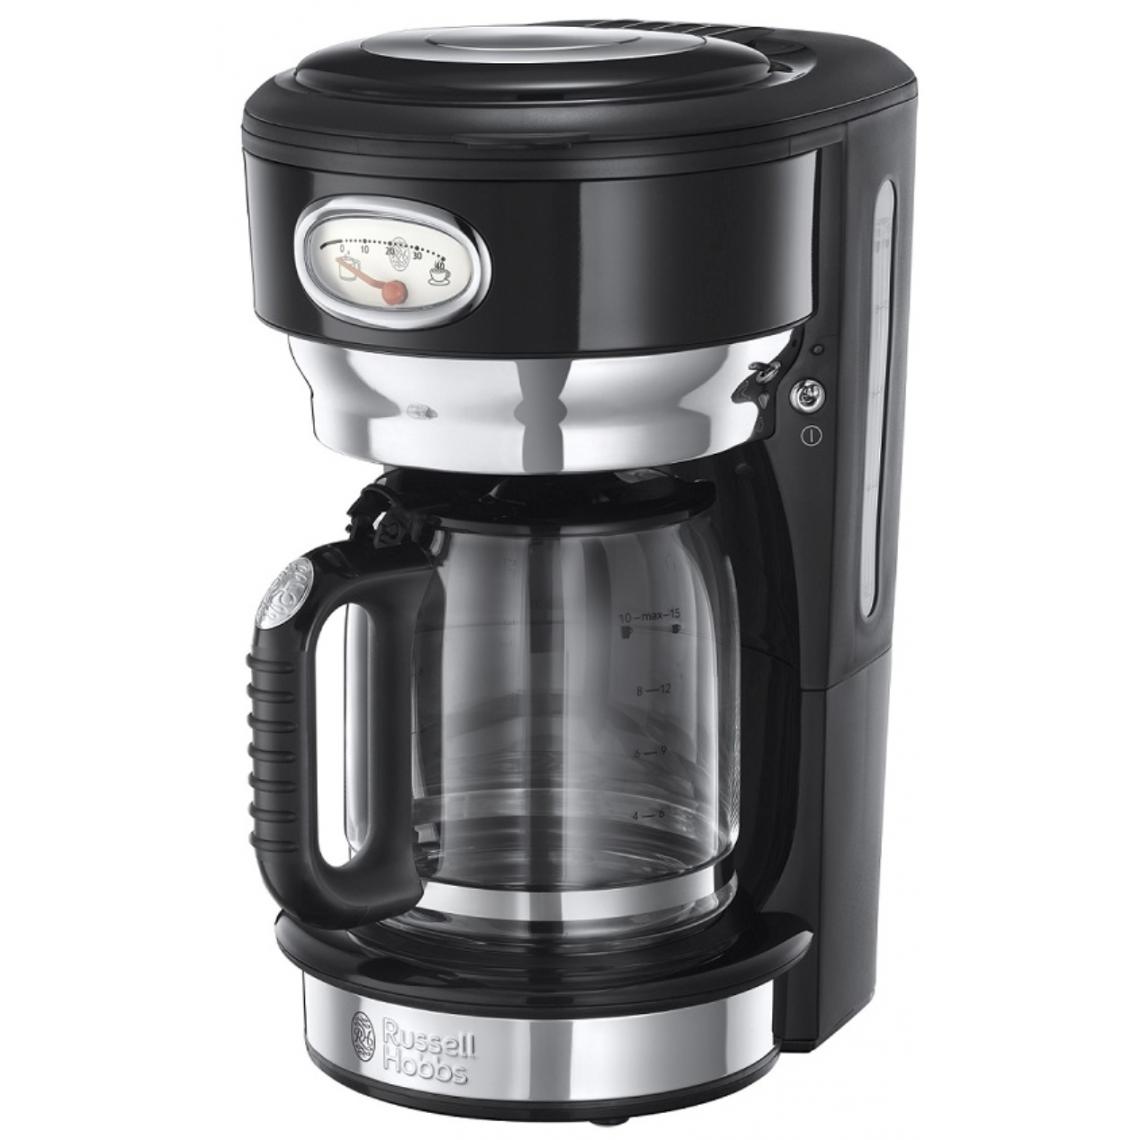 Russell Hobbs - russell hobbs - 21701-56 - Expresso - Cafetière